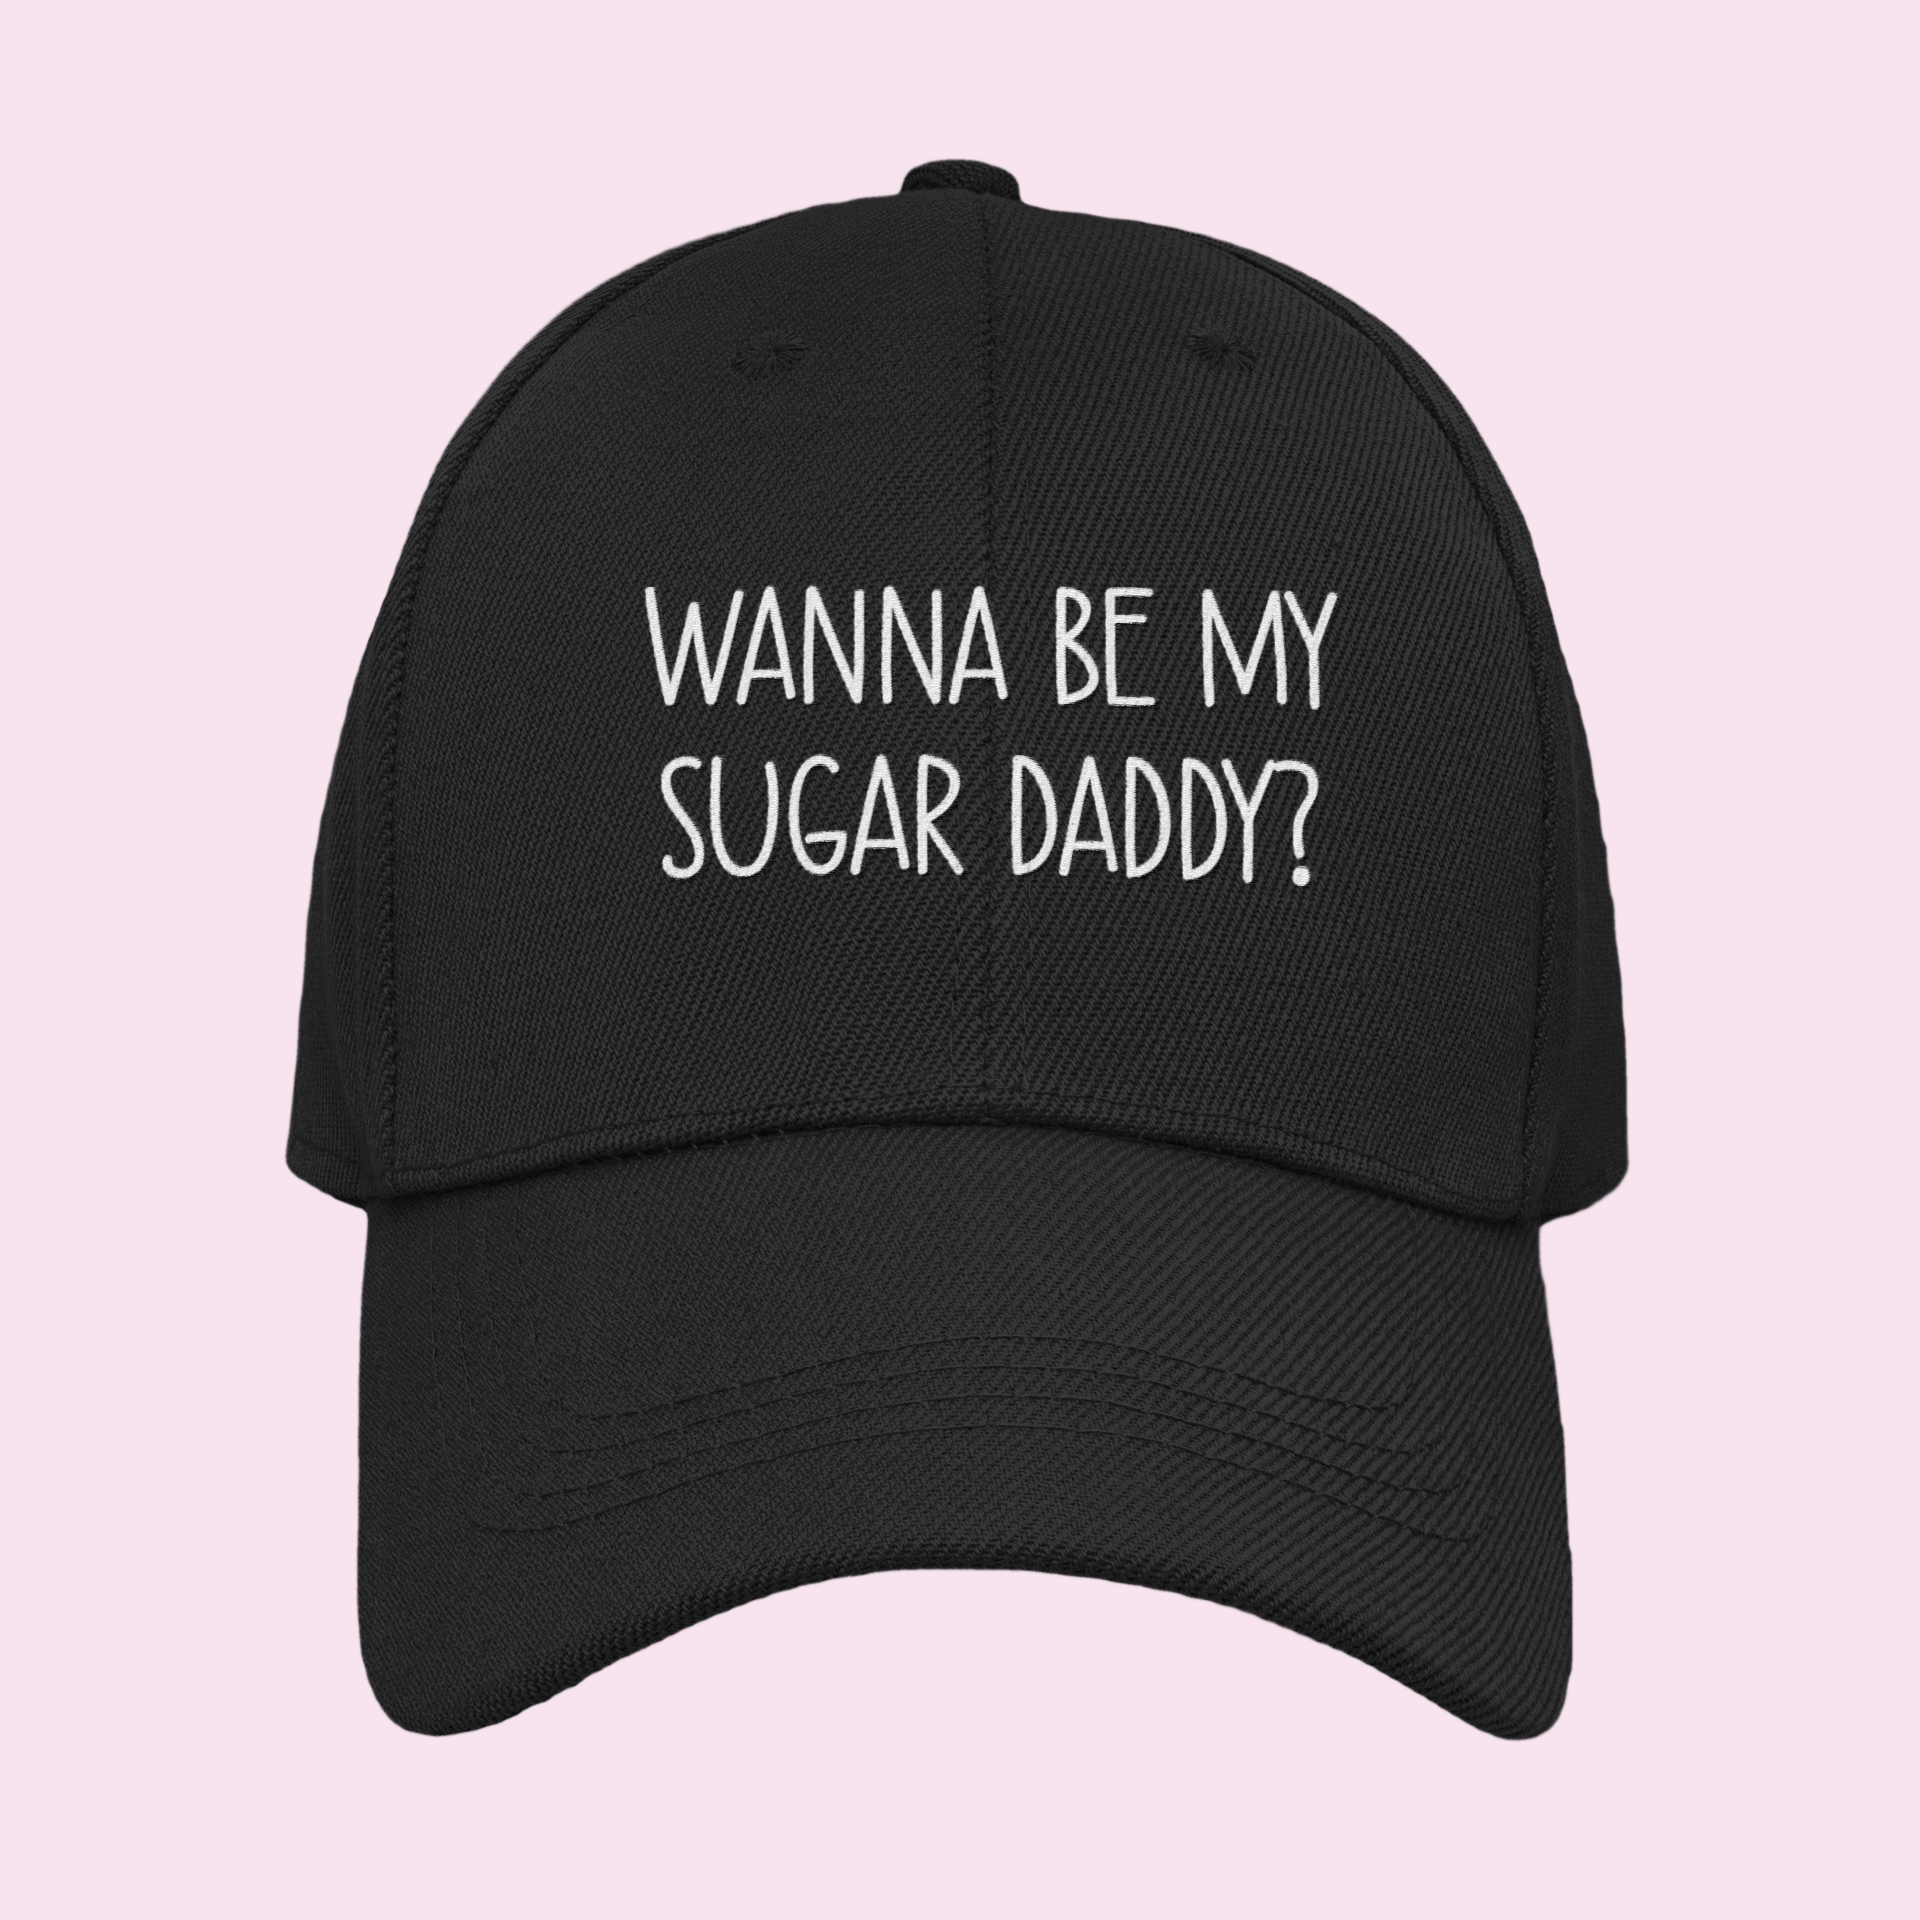 A black cotton cap with white lettering to the front which reads 'wanna be my sugar daddy?'.